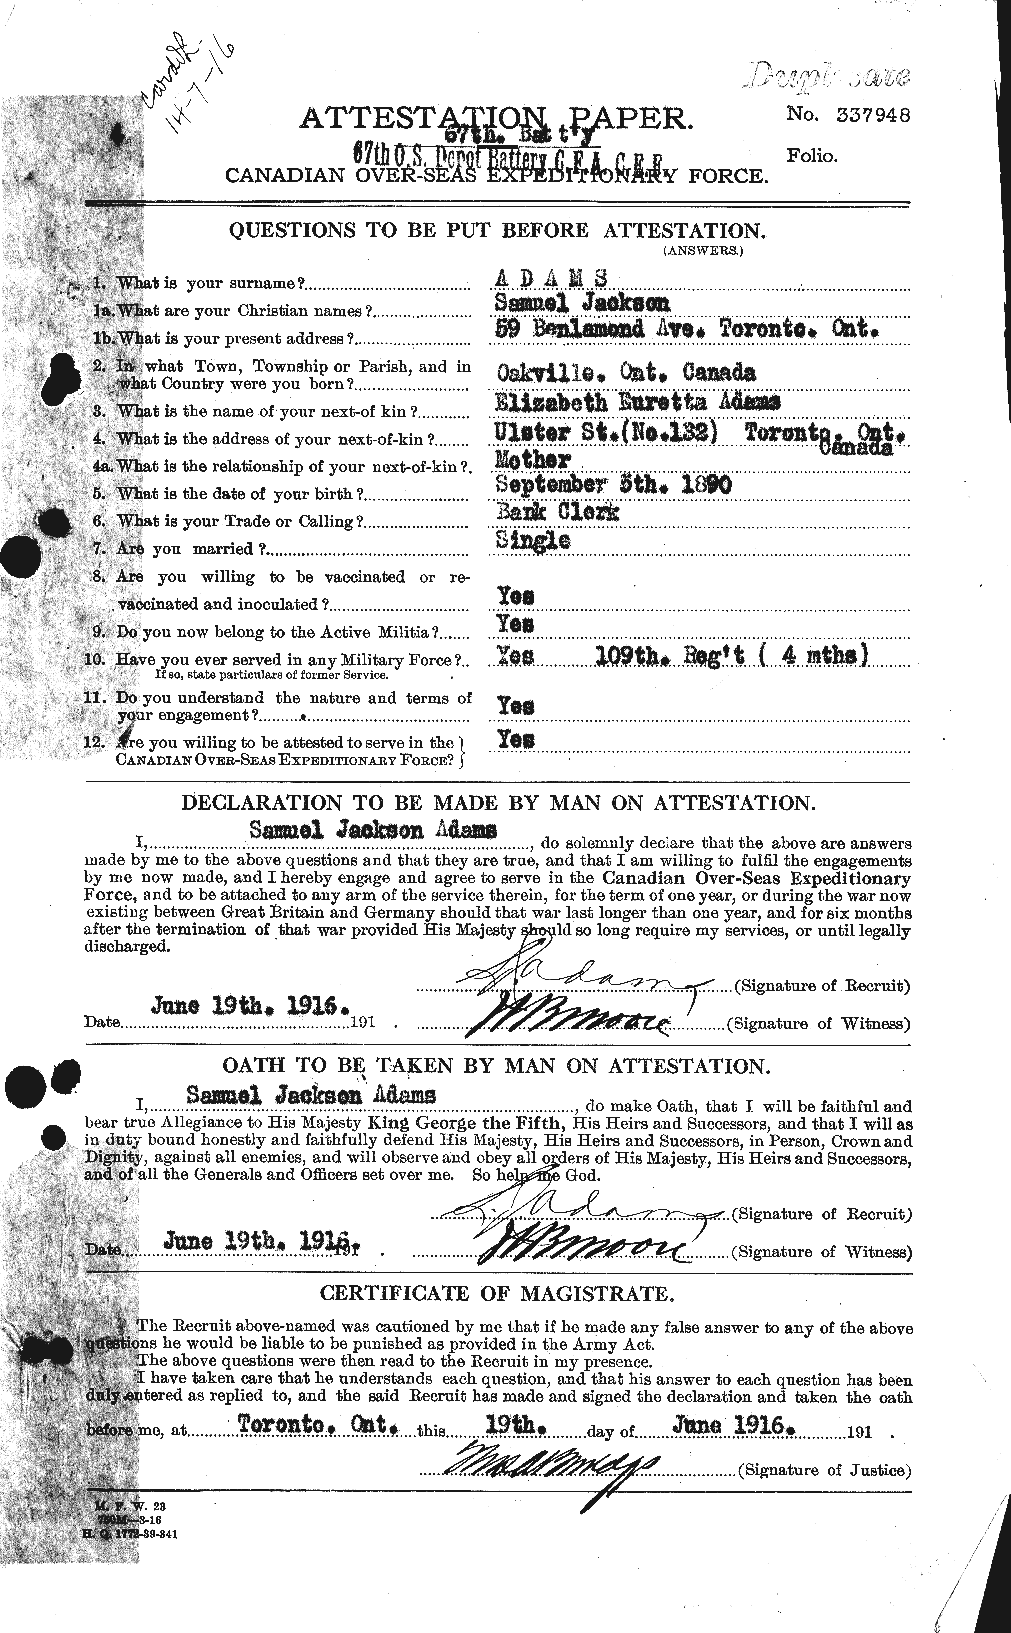 Personnel Records of the First World War - CEF 202134a